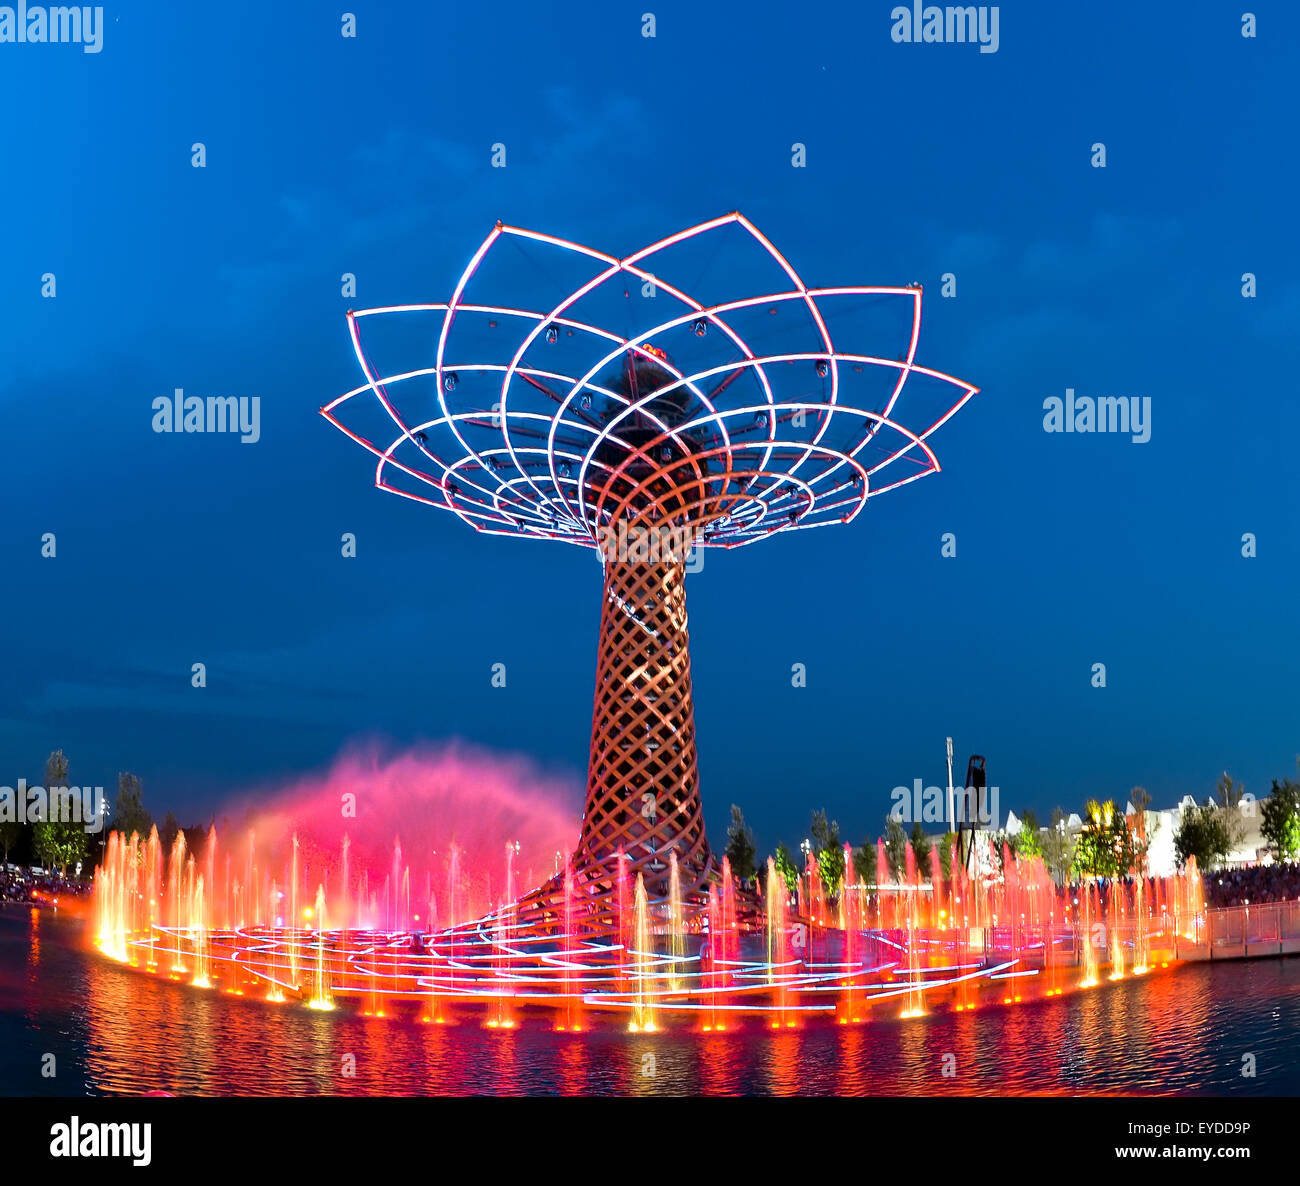 Expo 2015 - Tree of Life in Milan - Pink  light Stock Photo